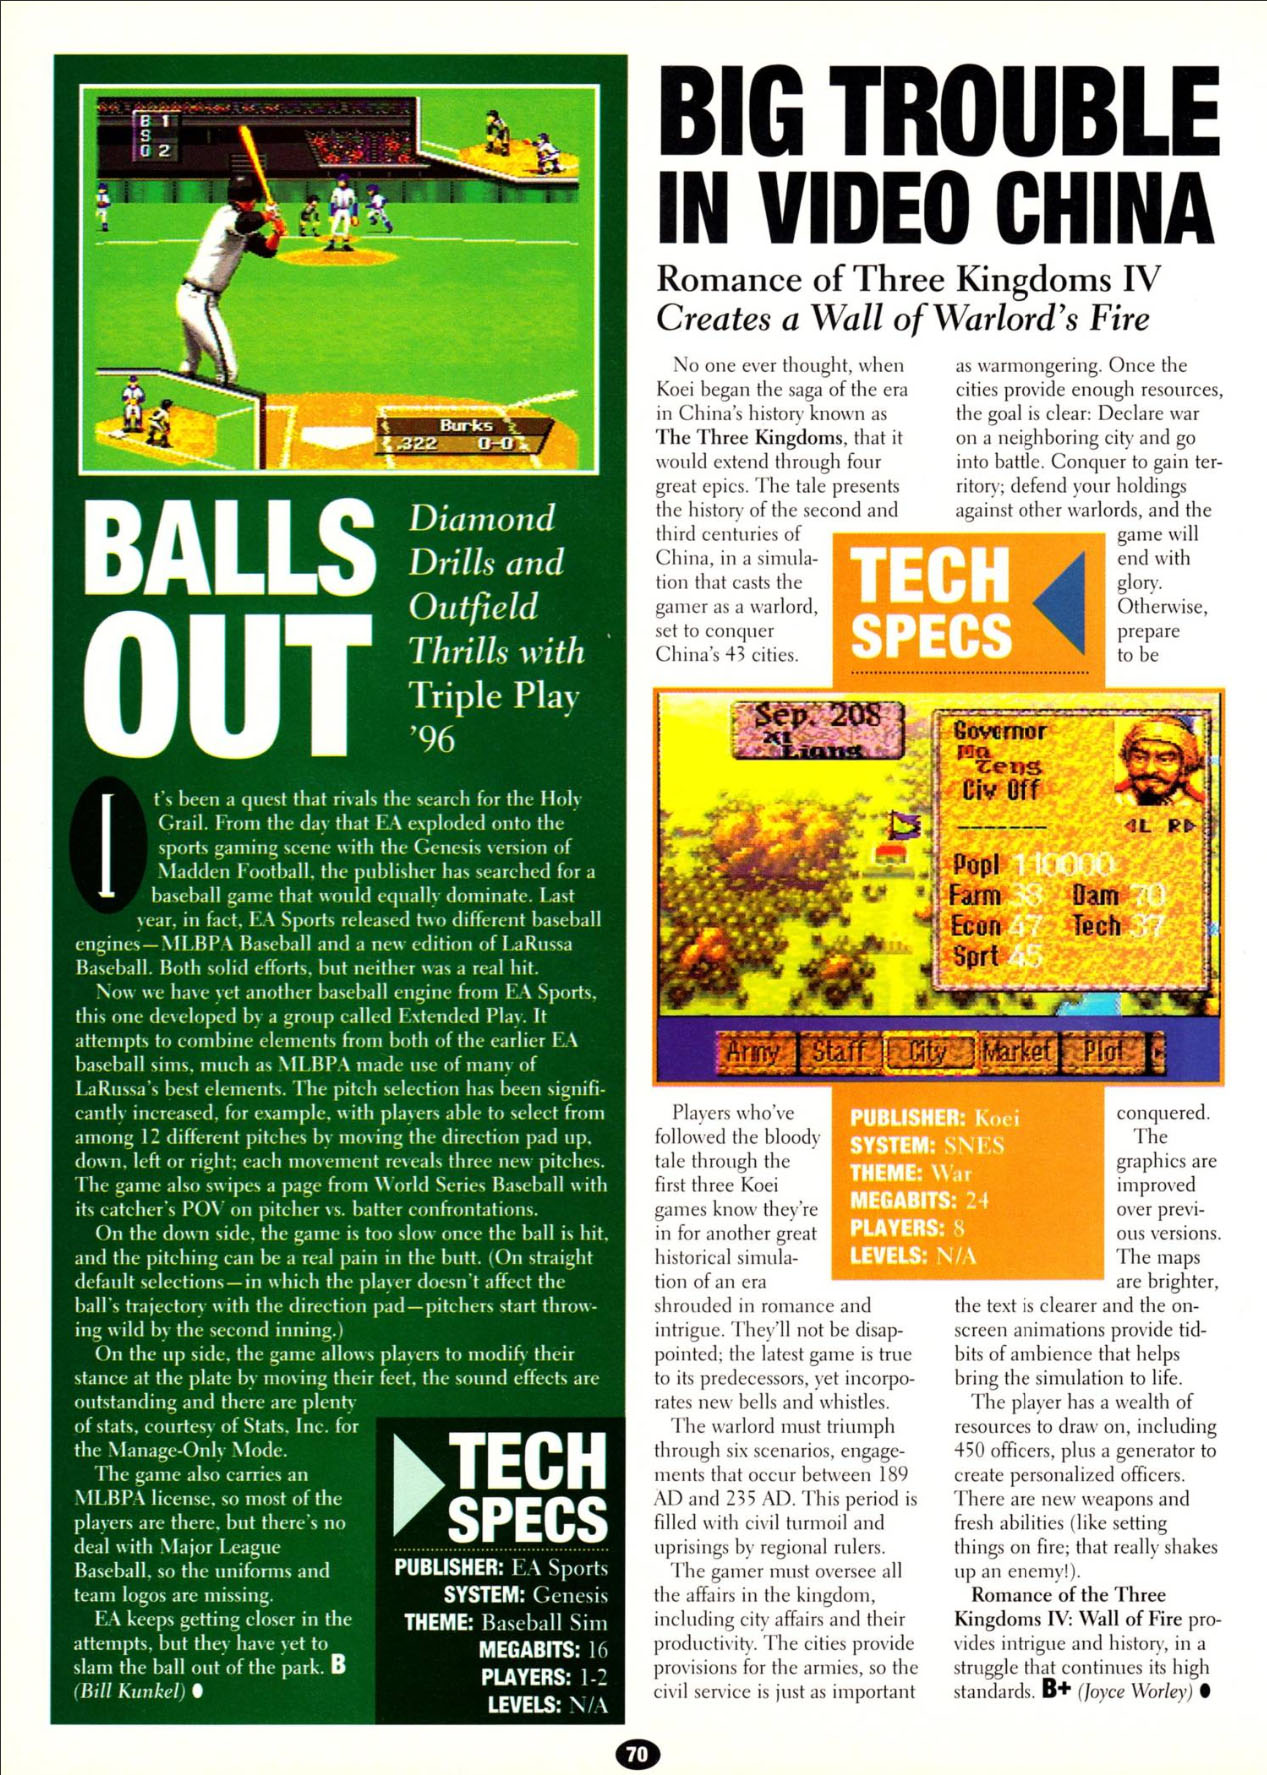 Balls Out, Fusion August 1995 page 70